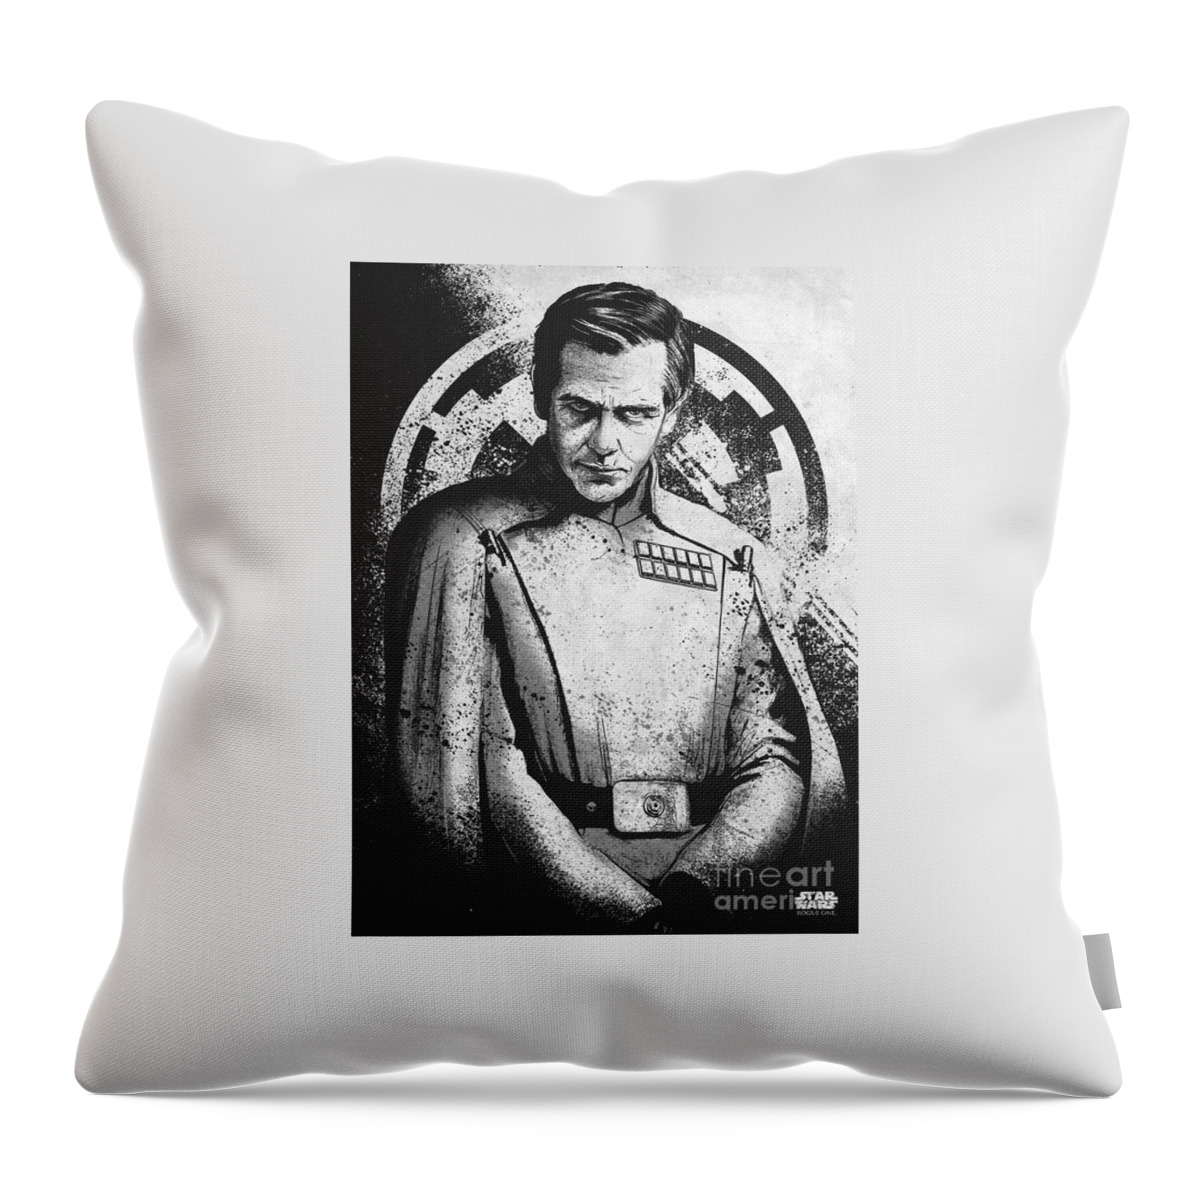 https://render.fineartamerica.com/images/rendered/default/throw-pillow/images/artworkimages/medium/3/6-star-wars-timothy-oxley.jpg?&targetx=125&targety=78&imagewidth=228&imageheight=322&modelwidth=479&modelheight=479&backgroundcolor=E8E8E8&orientation=0&producttype=throwpillow-14-14